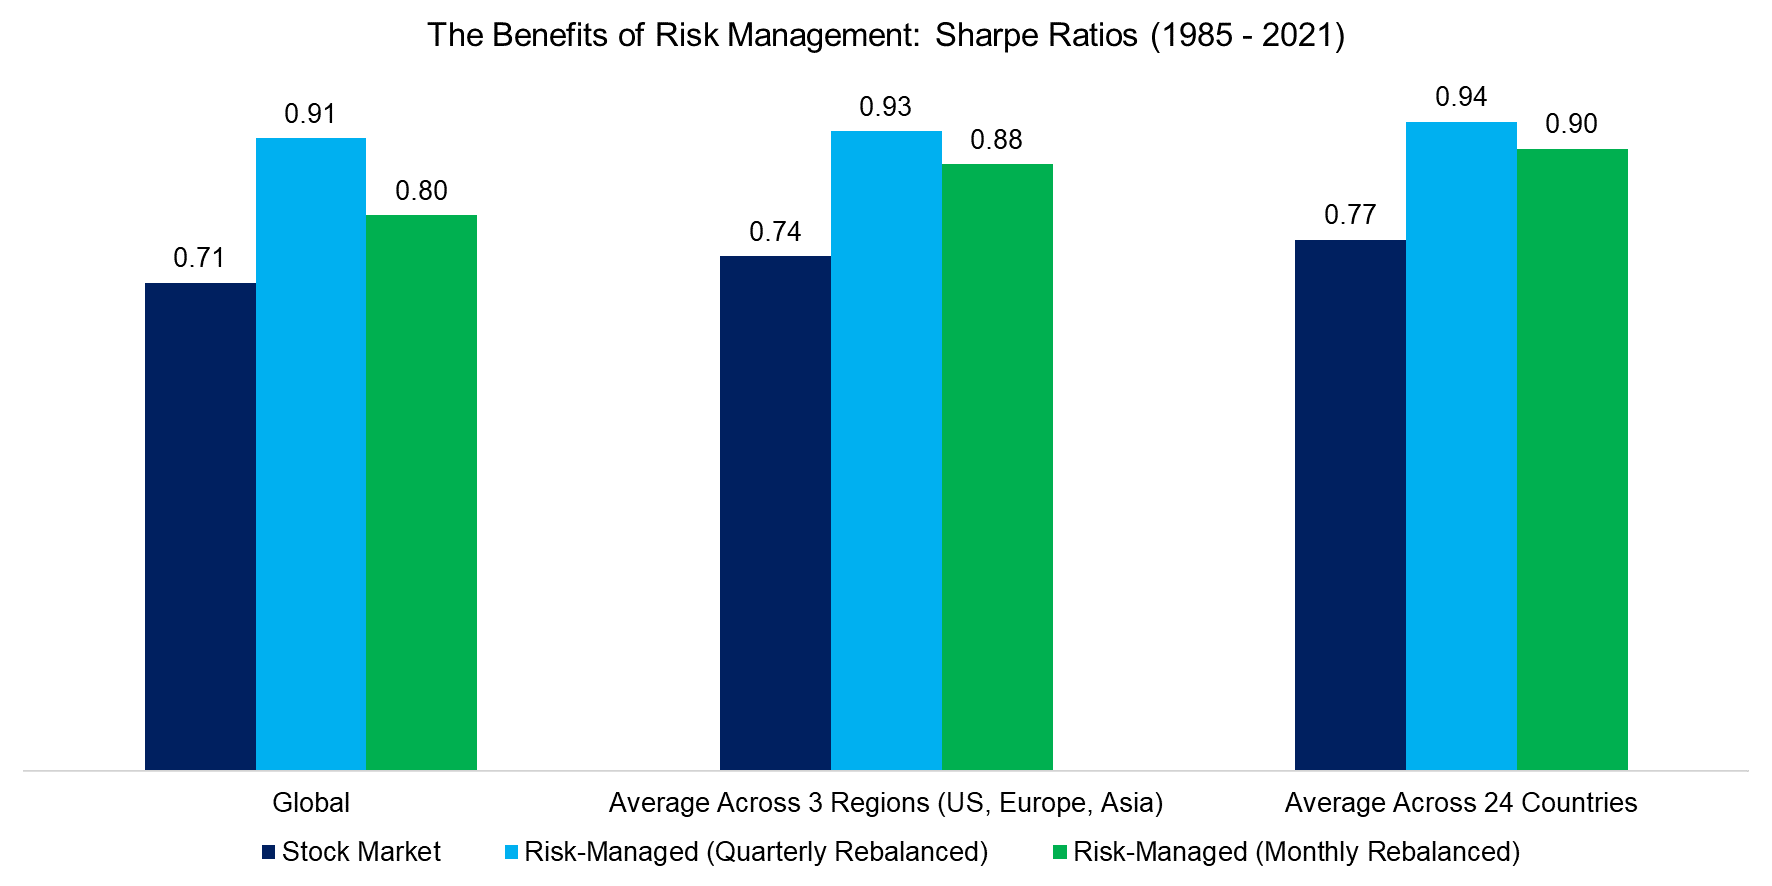 The Benefits of Risk Management Sharpe Ratios (1985 - 2021)